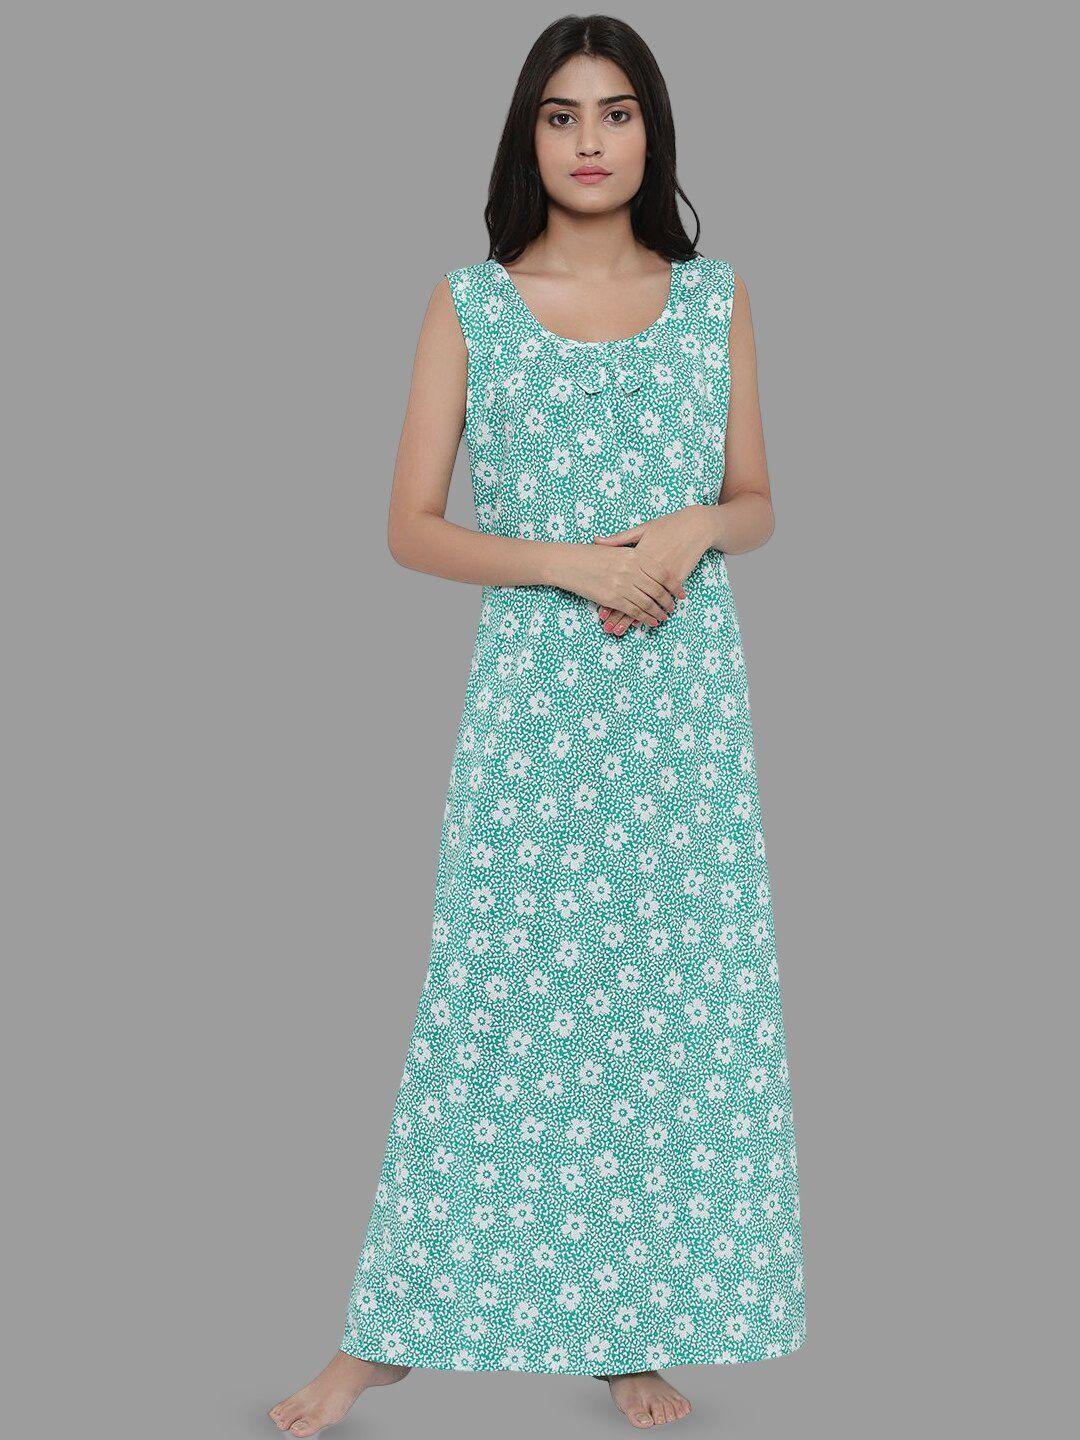 palival floral printed pure cotton maxi nightdress